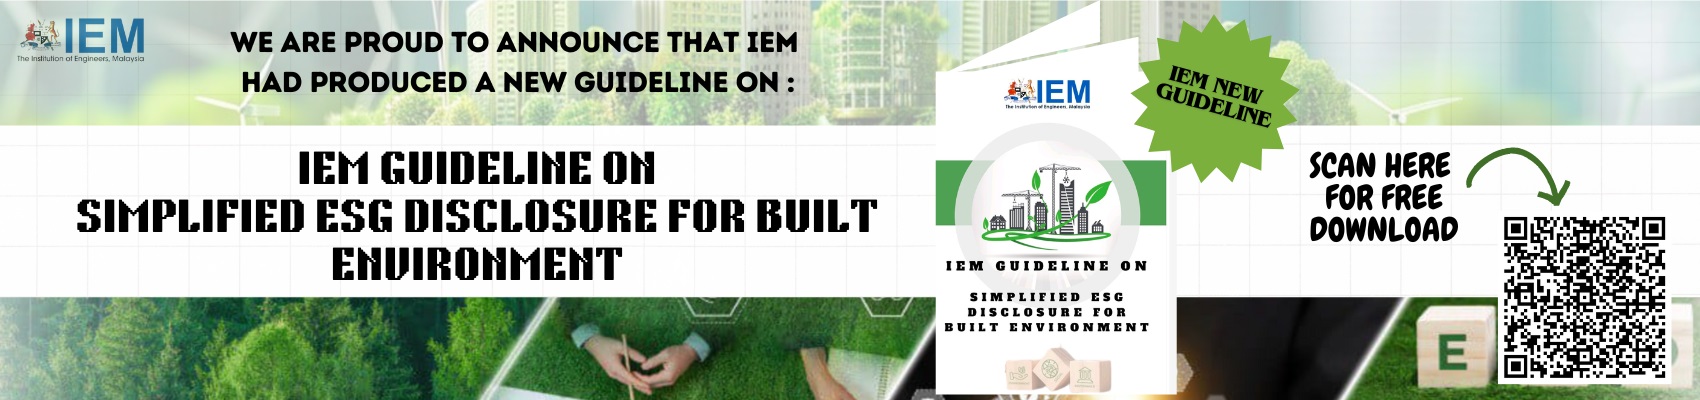 IEM Guidelines on Simplified ESG Disclosure for Built Environment